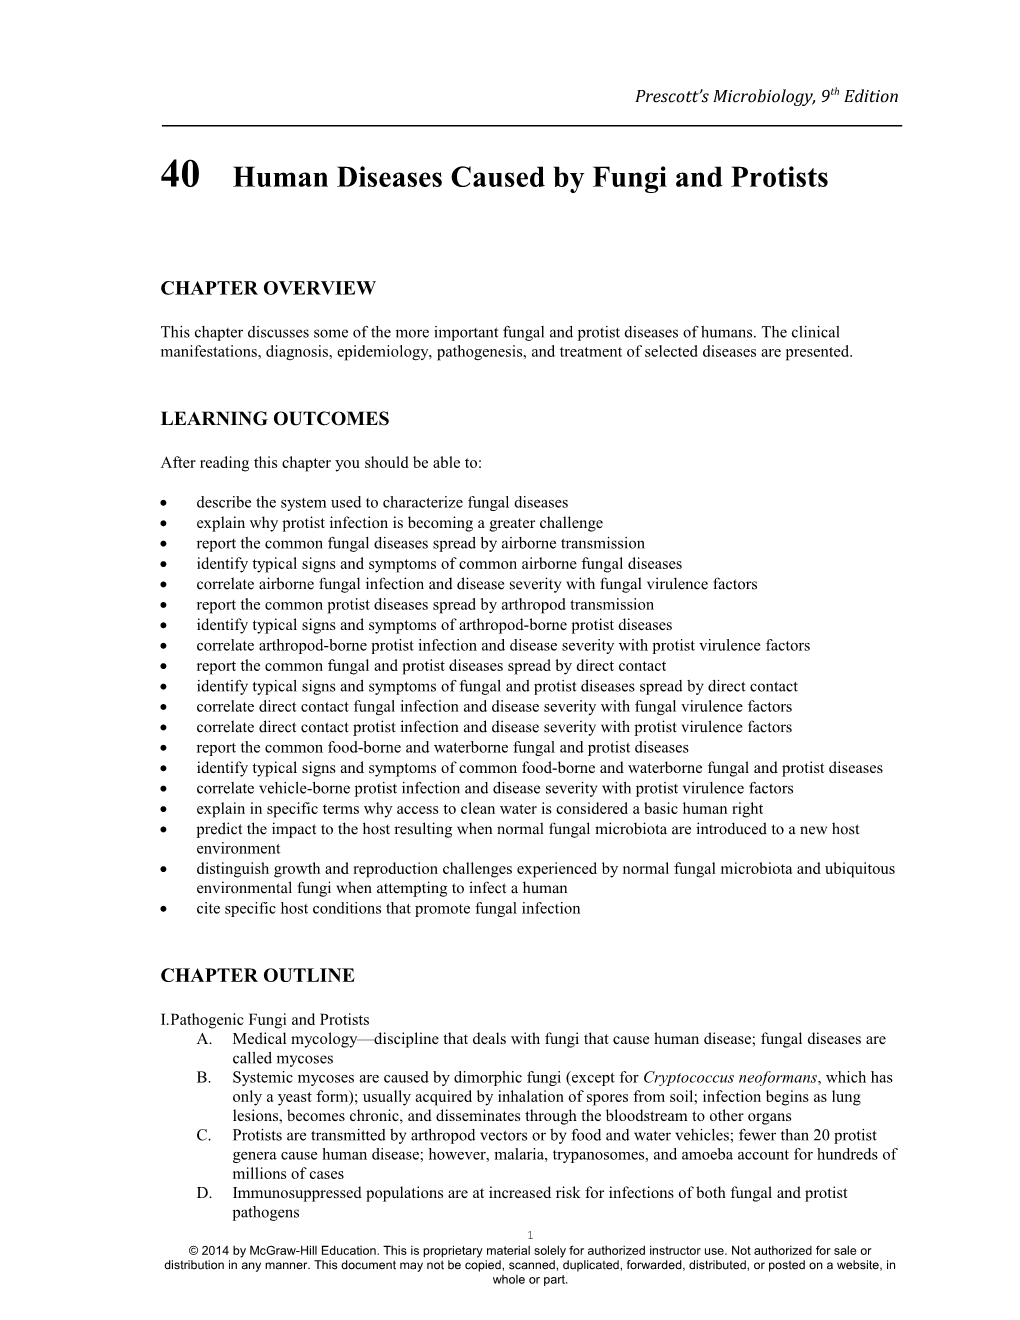 40Human Diseases Caused by Fungi and Protists